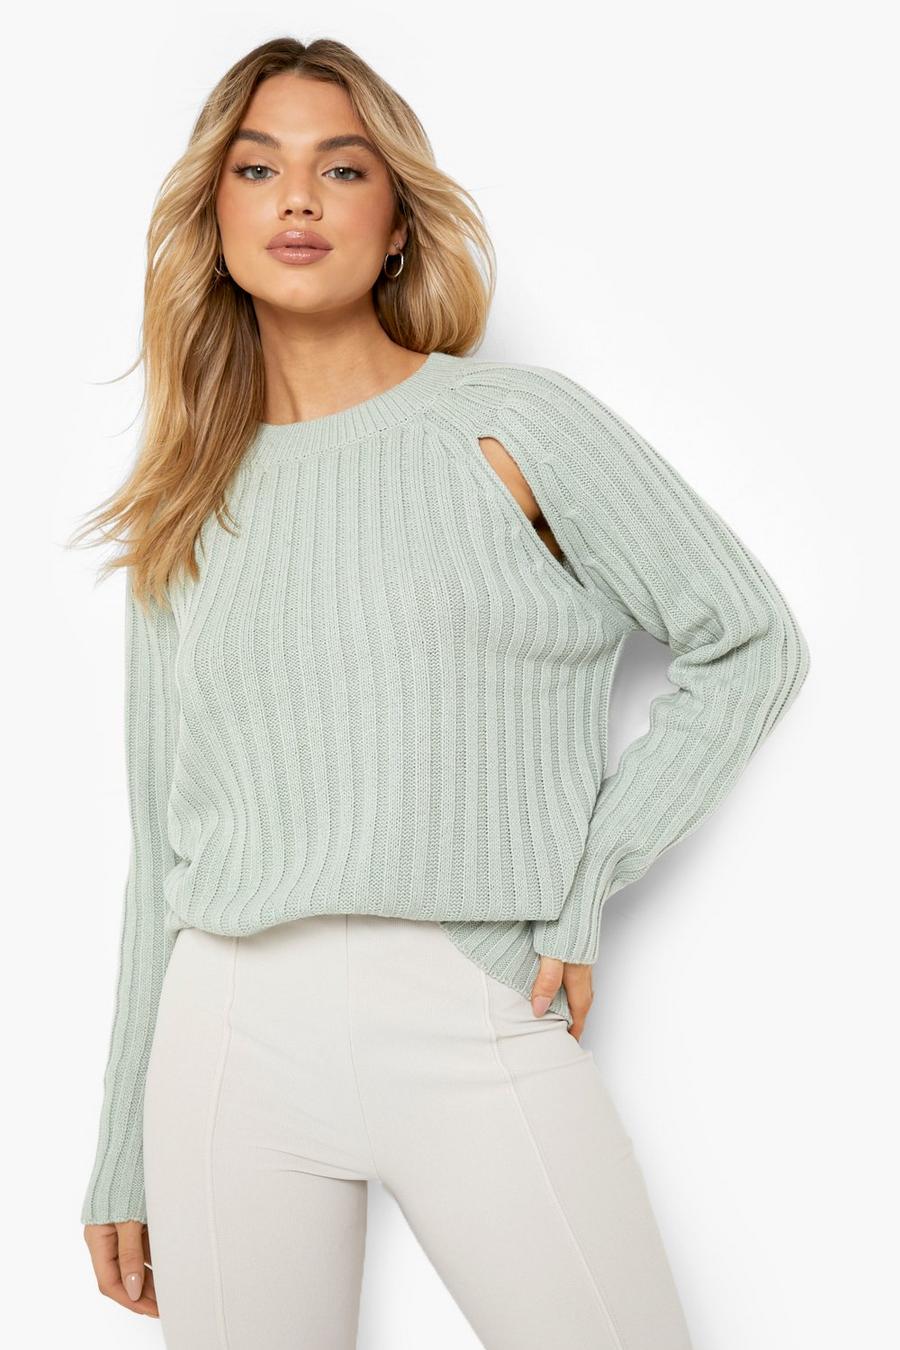 Khaki Cut Out Sleeve Detail Rib Knitted Sweater